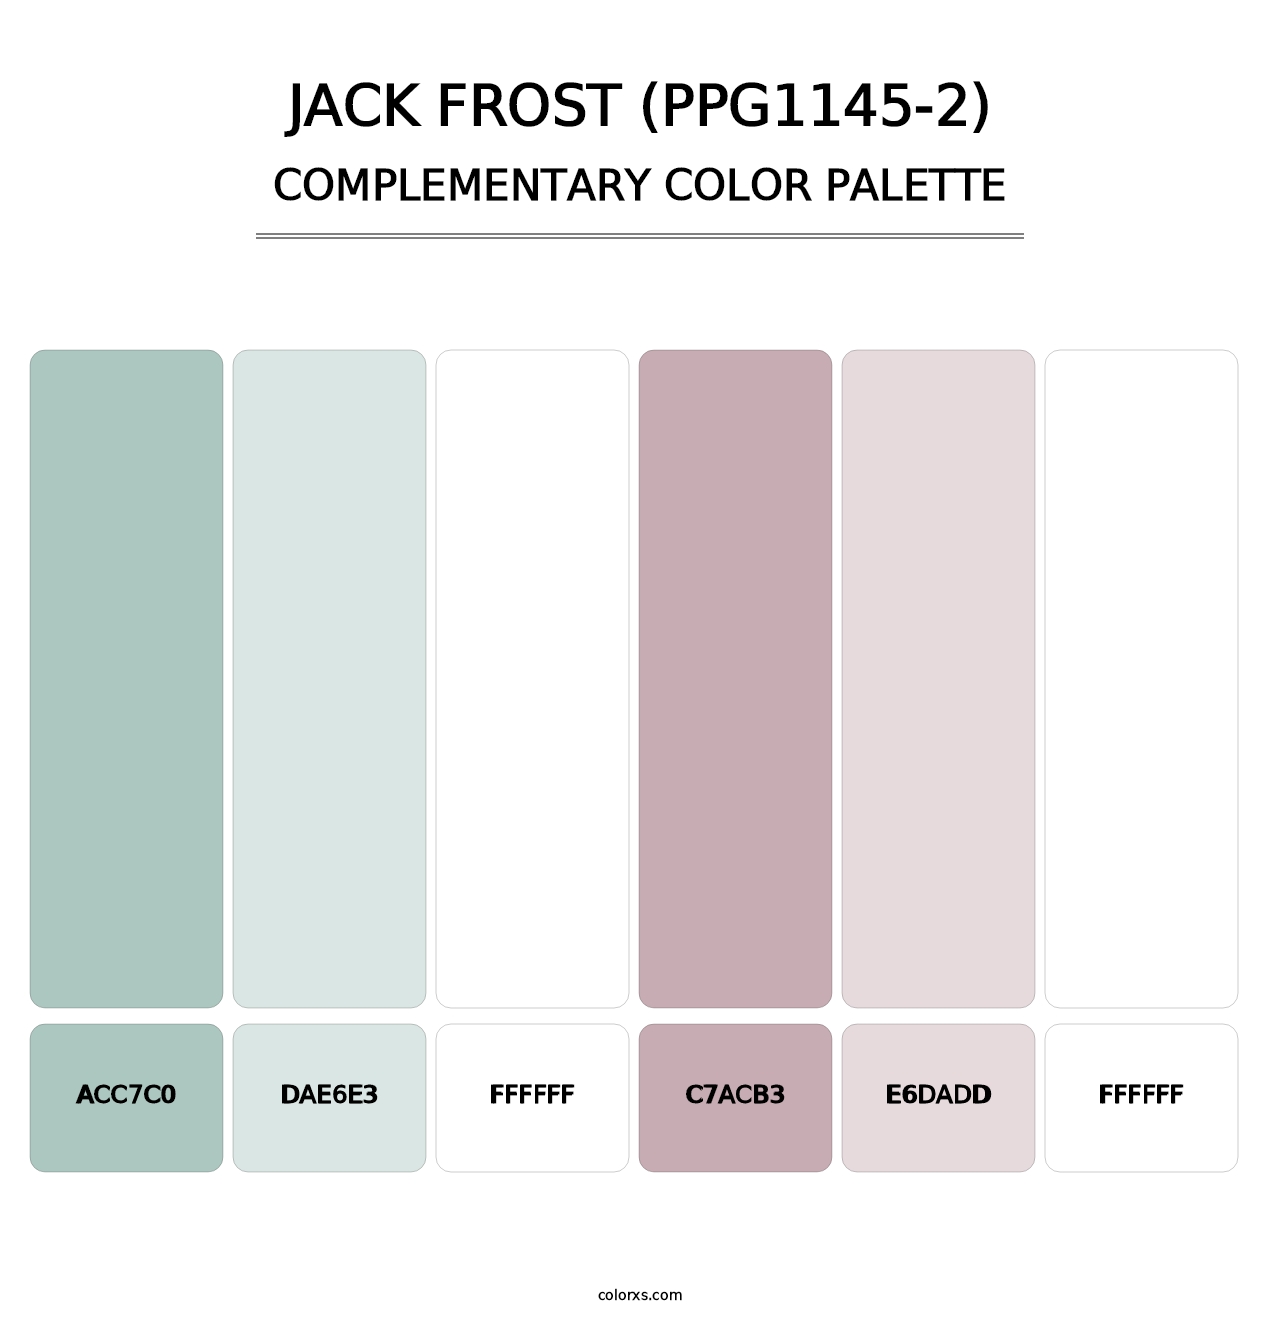 Jack Frost (PPG1145-2) - Complementary Color Palette